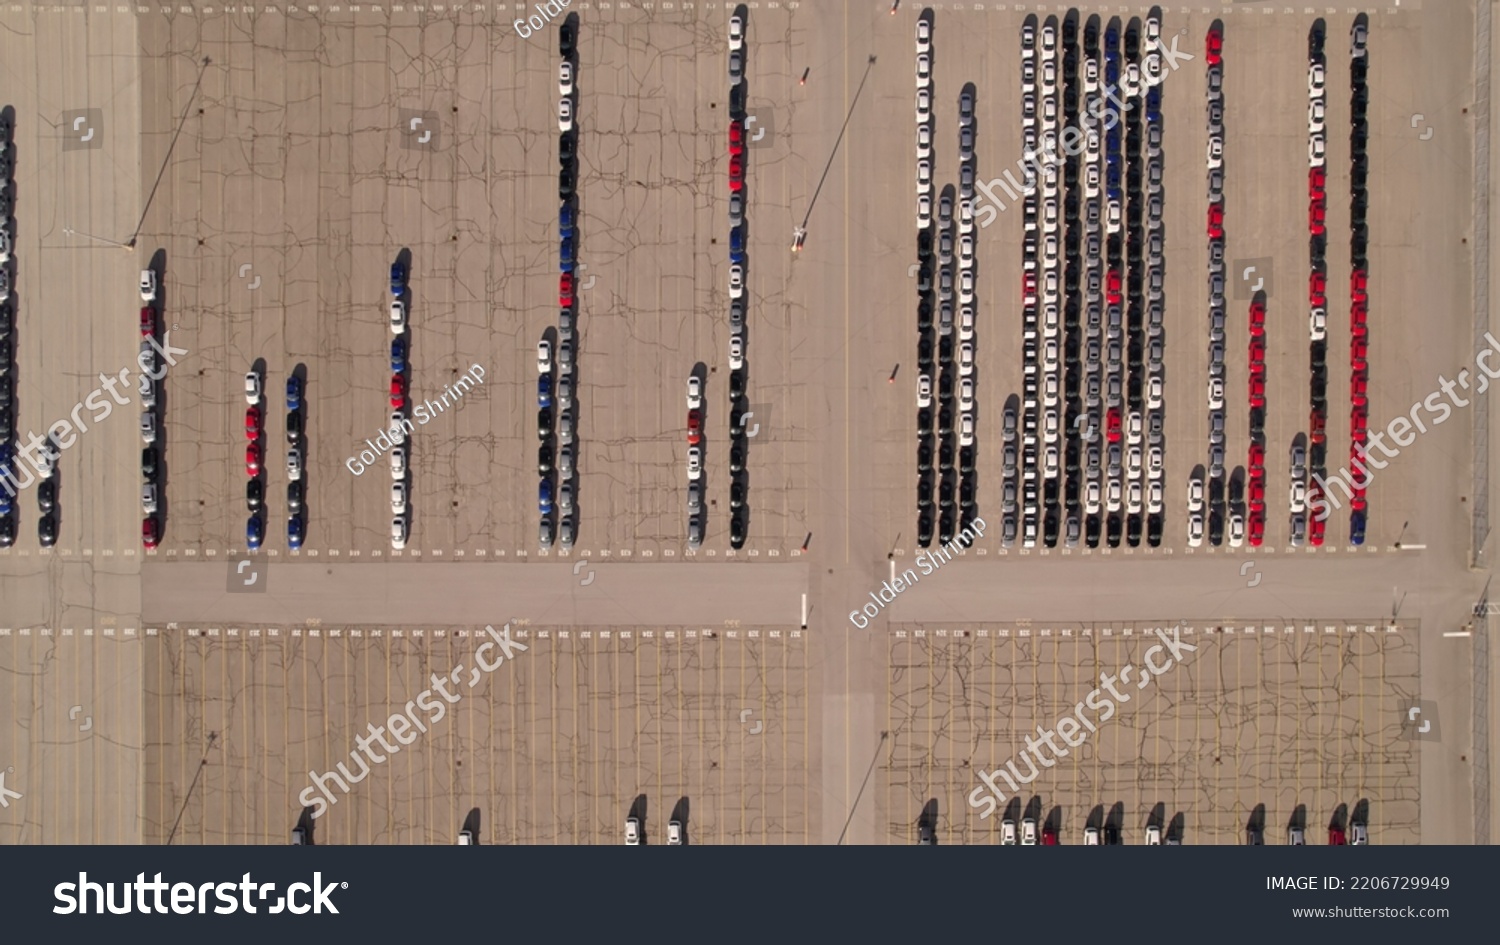 Aerial view of car storage or parking lot new unsold EV cars. Vehicle automaker and manufacturer parking facility. Low carbon footprint EV electric cars are ready for further distribution.  #2206729949